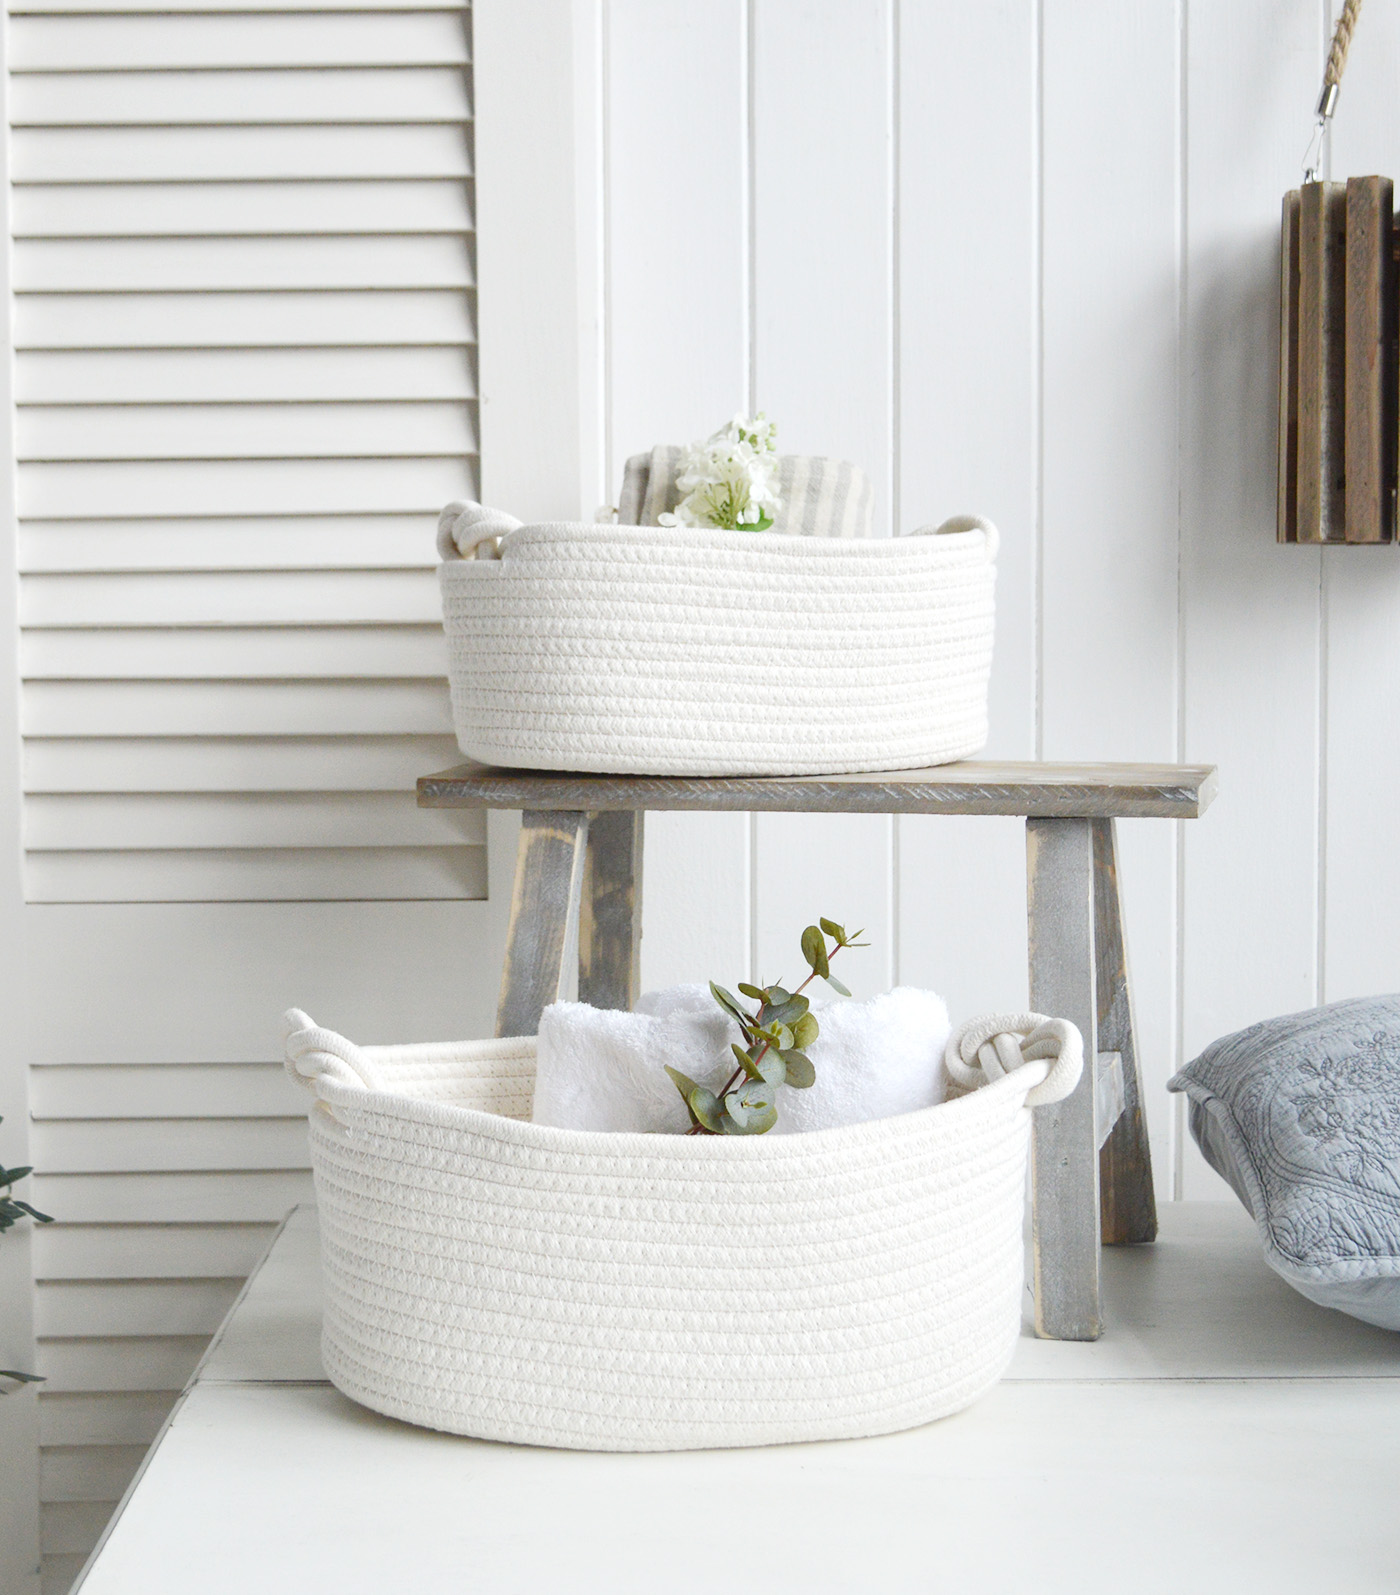 Set of Hove White Soft Cotton Basket. New England Coastal, Country and Modern Farmhouse furniture and interiors from The White Lighthouse